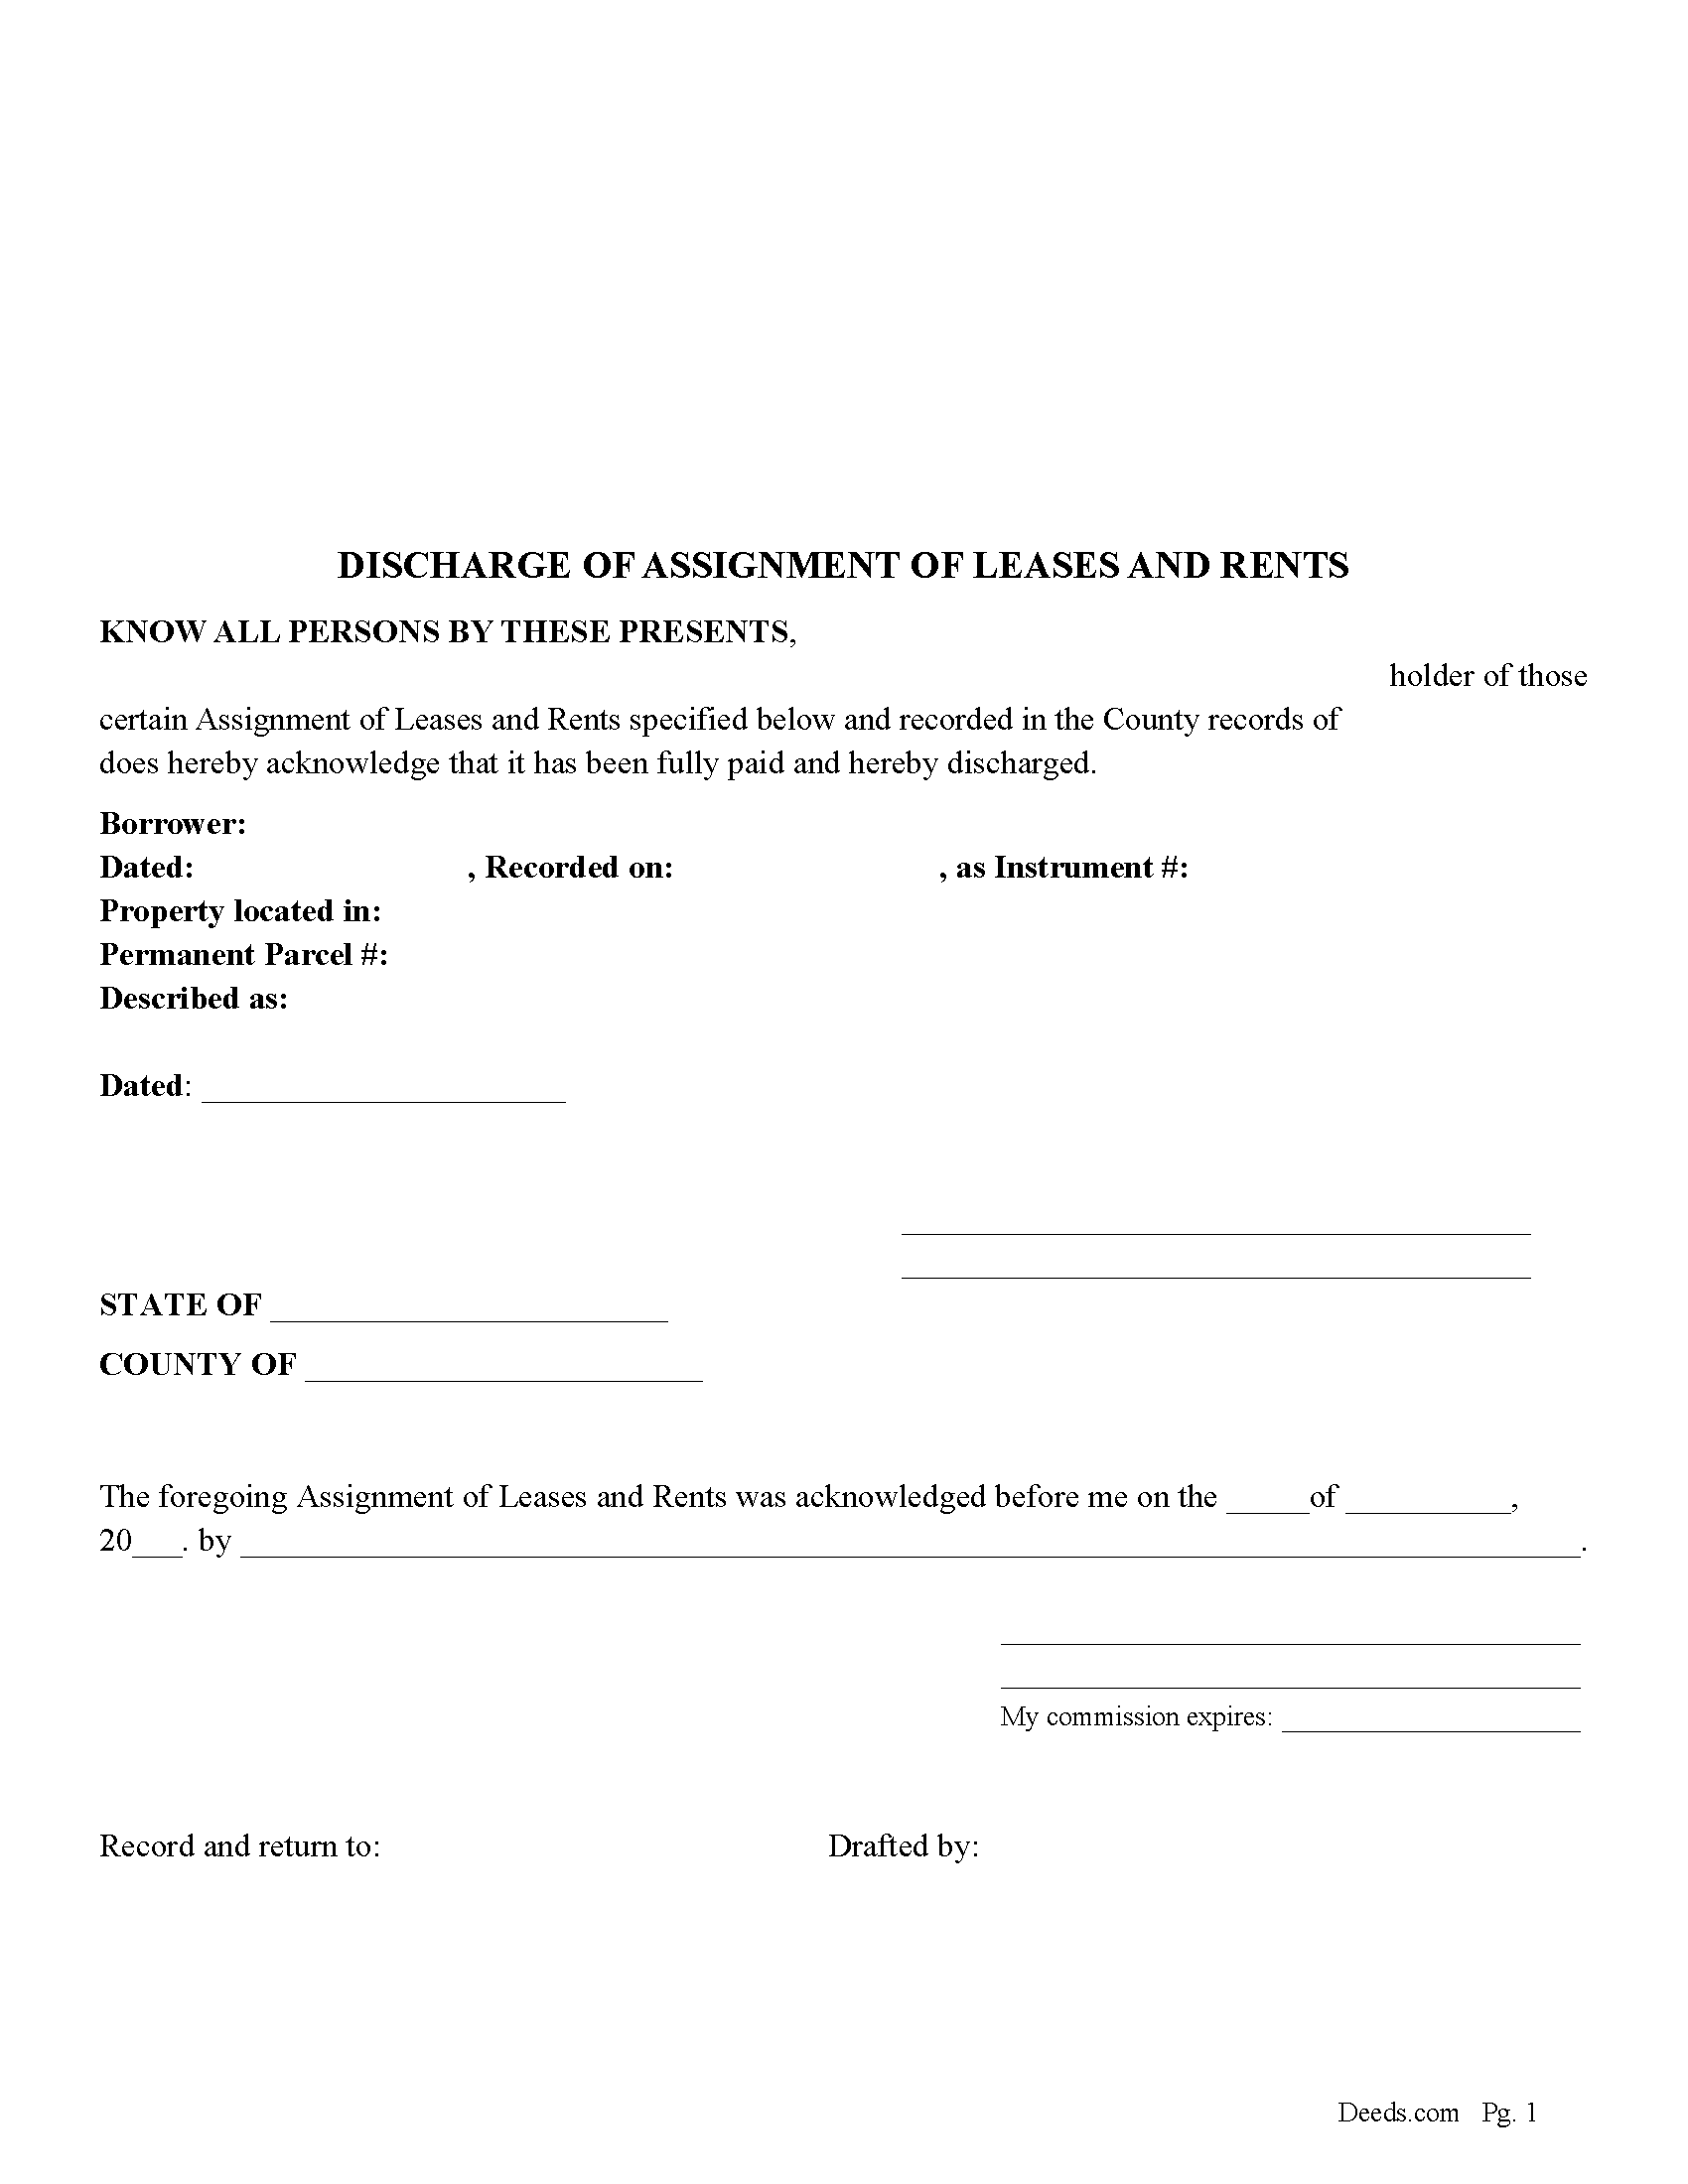 assignment of leases and rents form